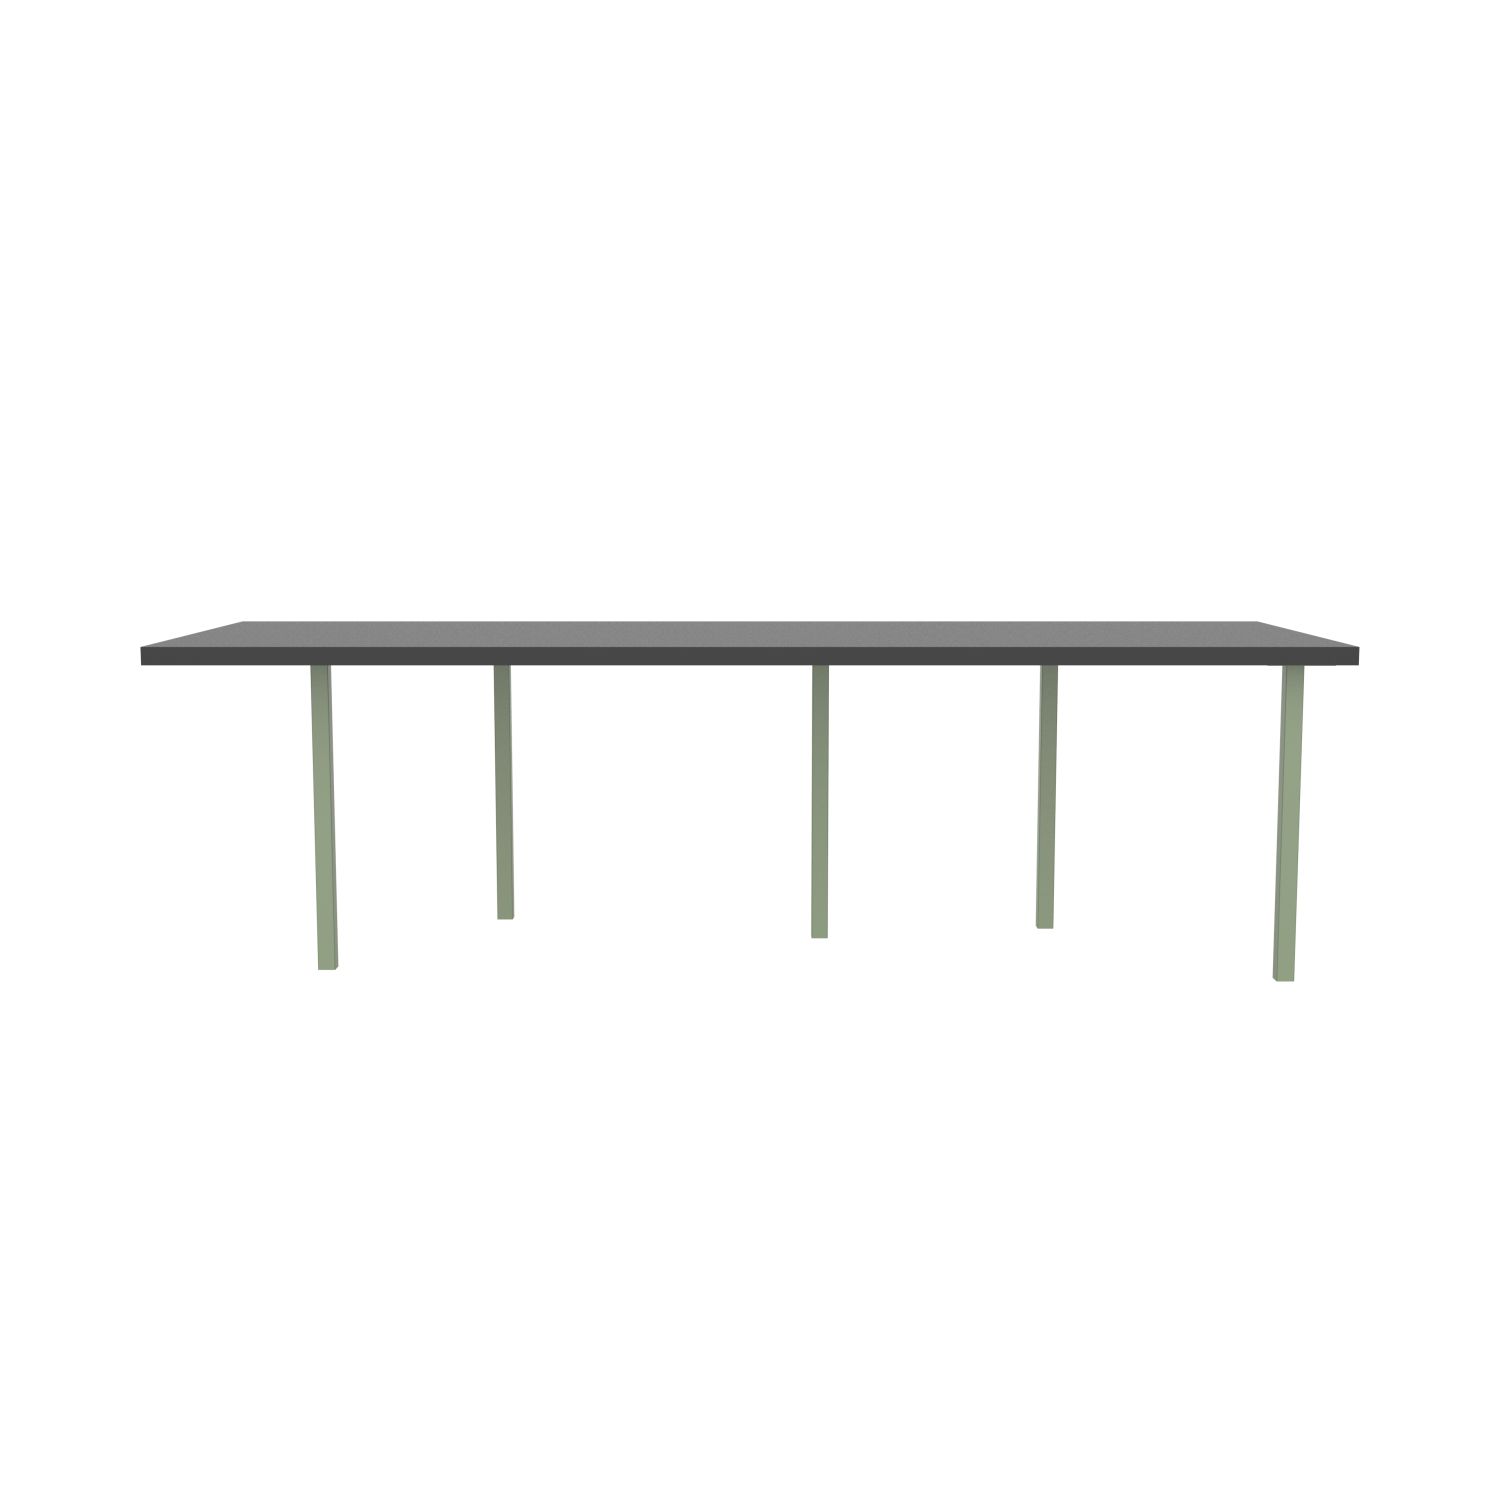 lensvelt bbrand table five fixed heigt 915x264 hpl black 50 mm price level 1 green ral6021